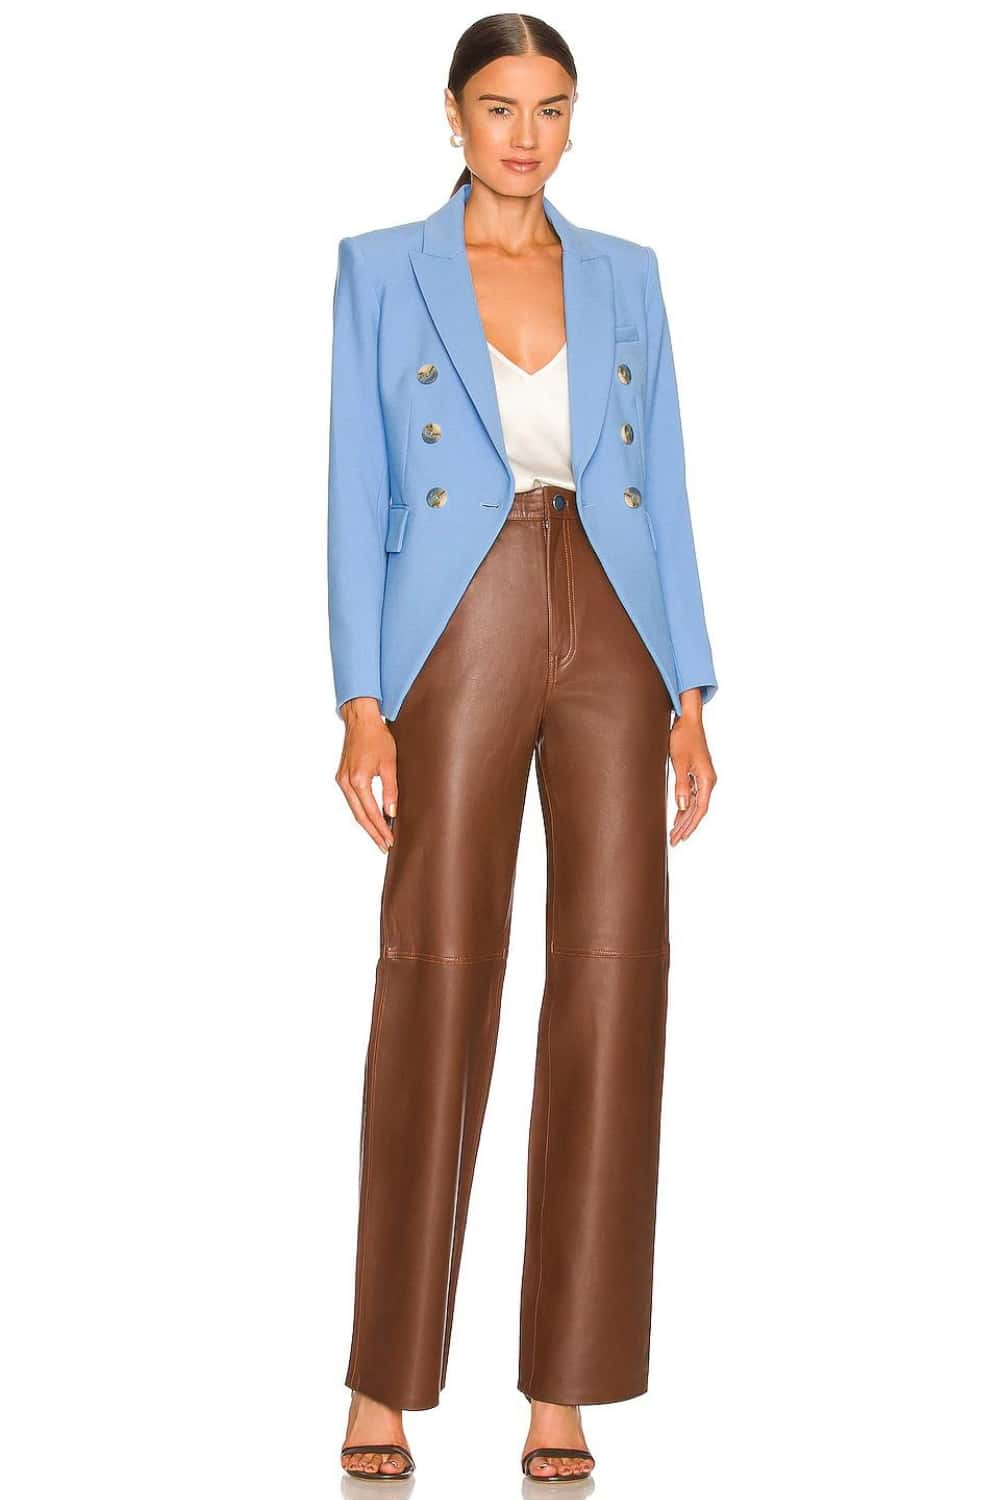 Camisole and Blazer with Leather Pants